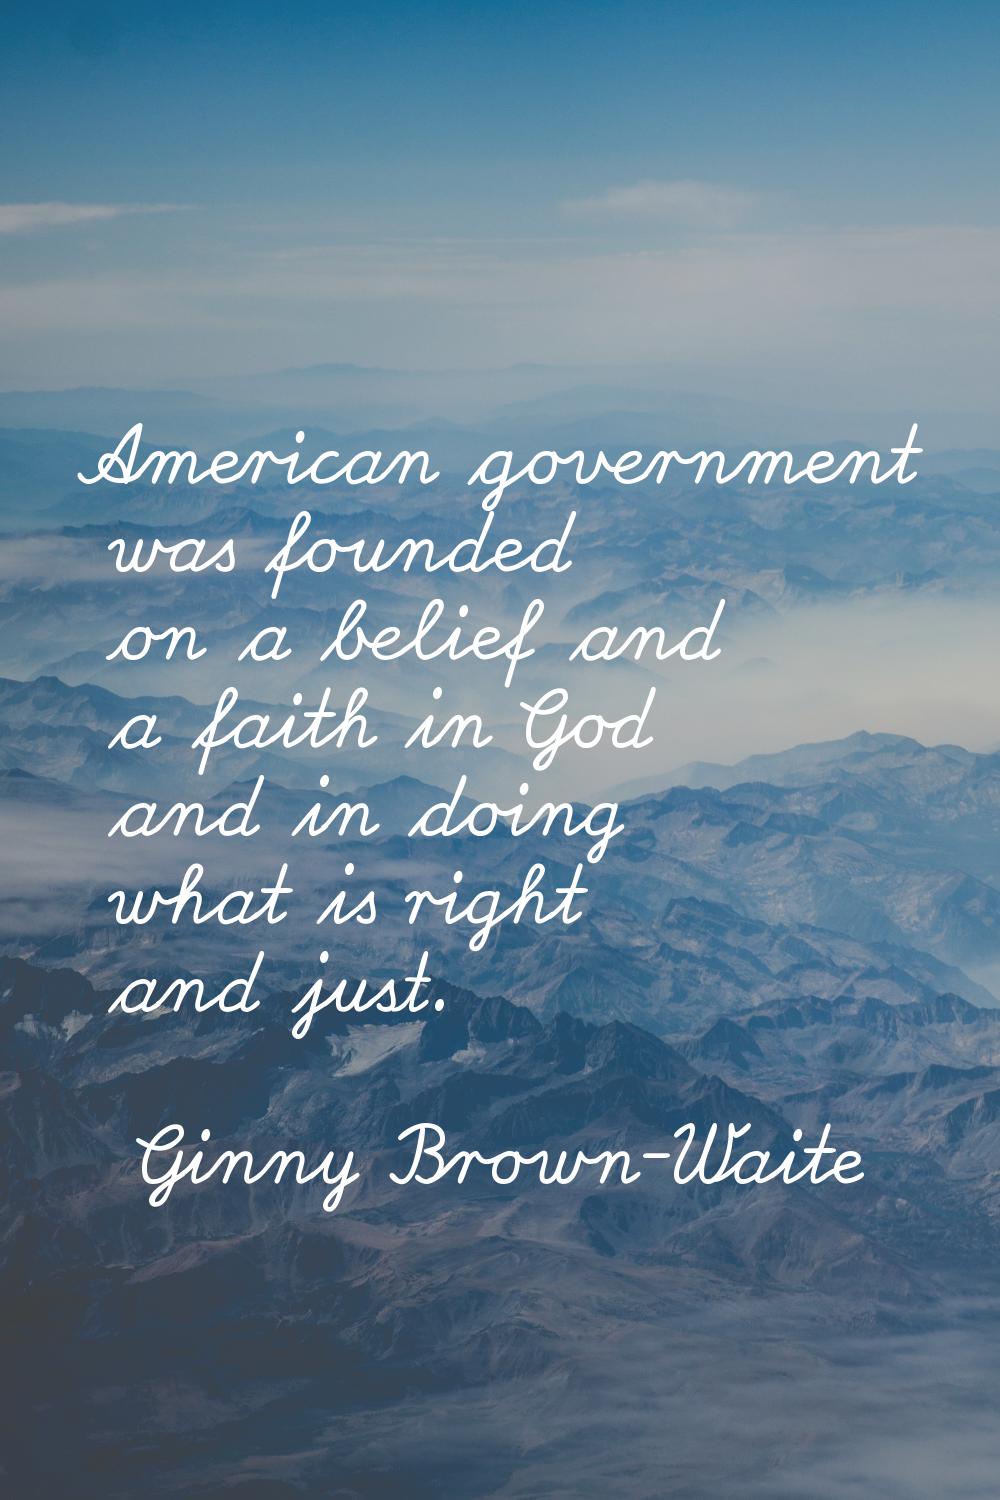 American government was founded on a belief and a faith in God and in doing what is right and just.